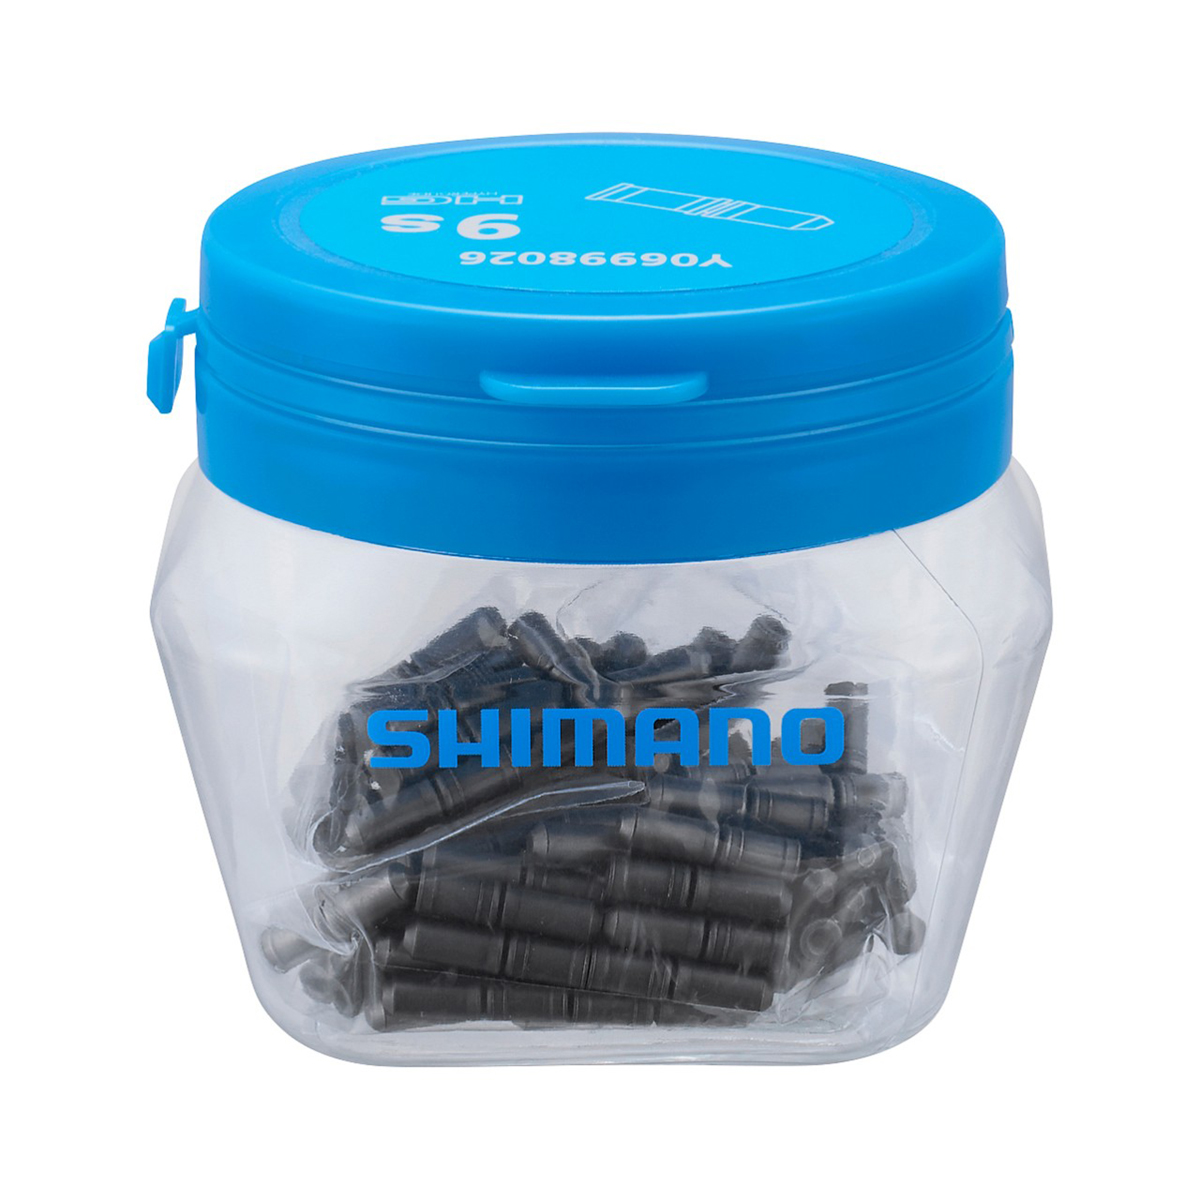 Shimano Chain Connection Pins 9s CN-7700 1pcs